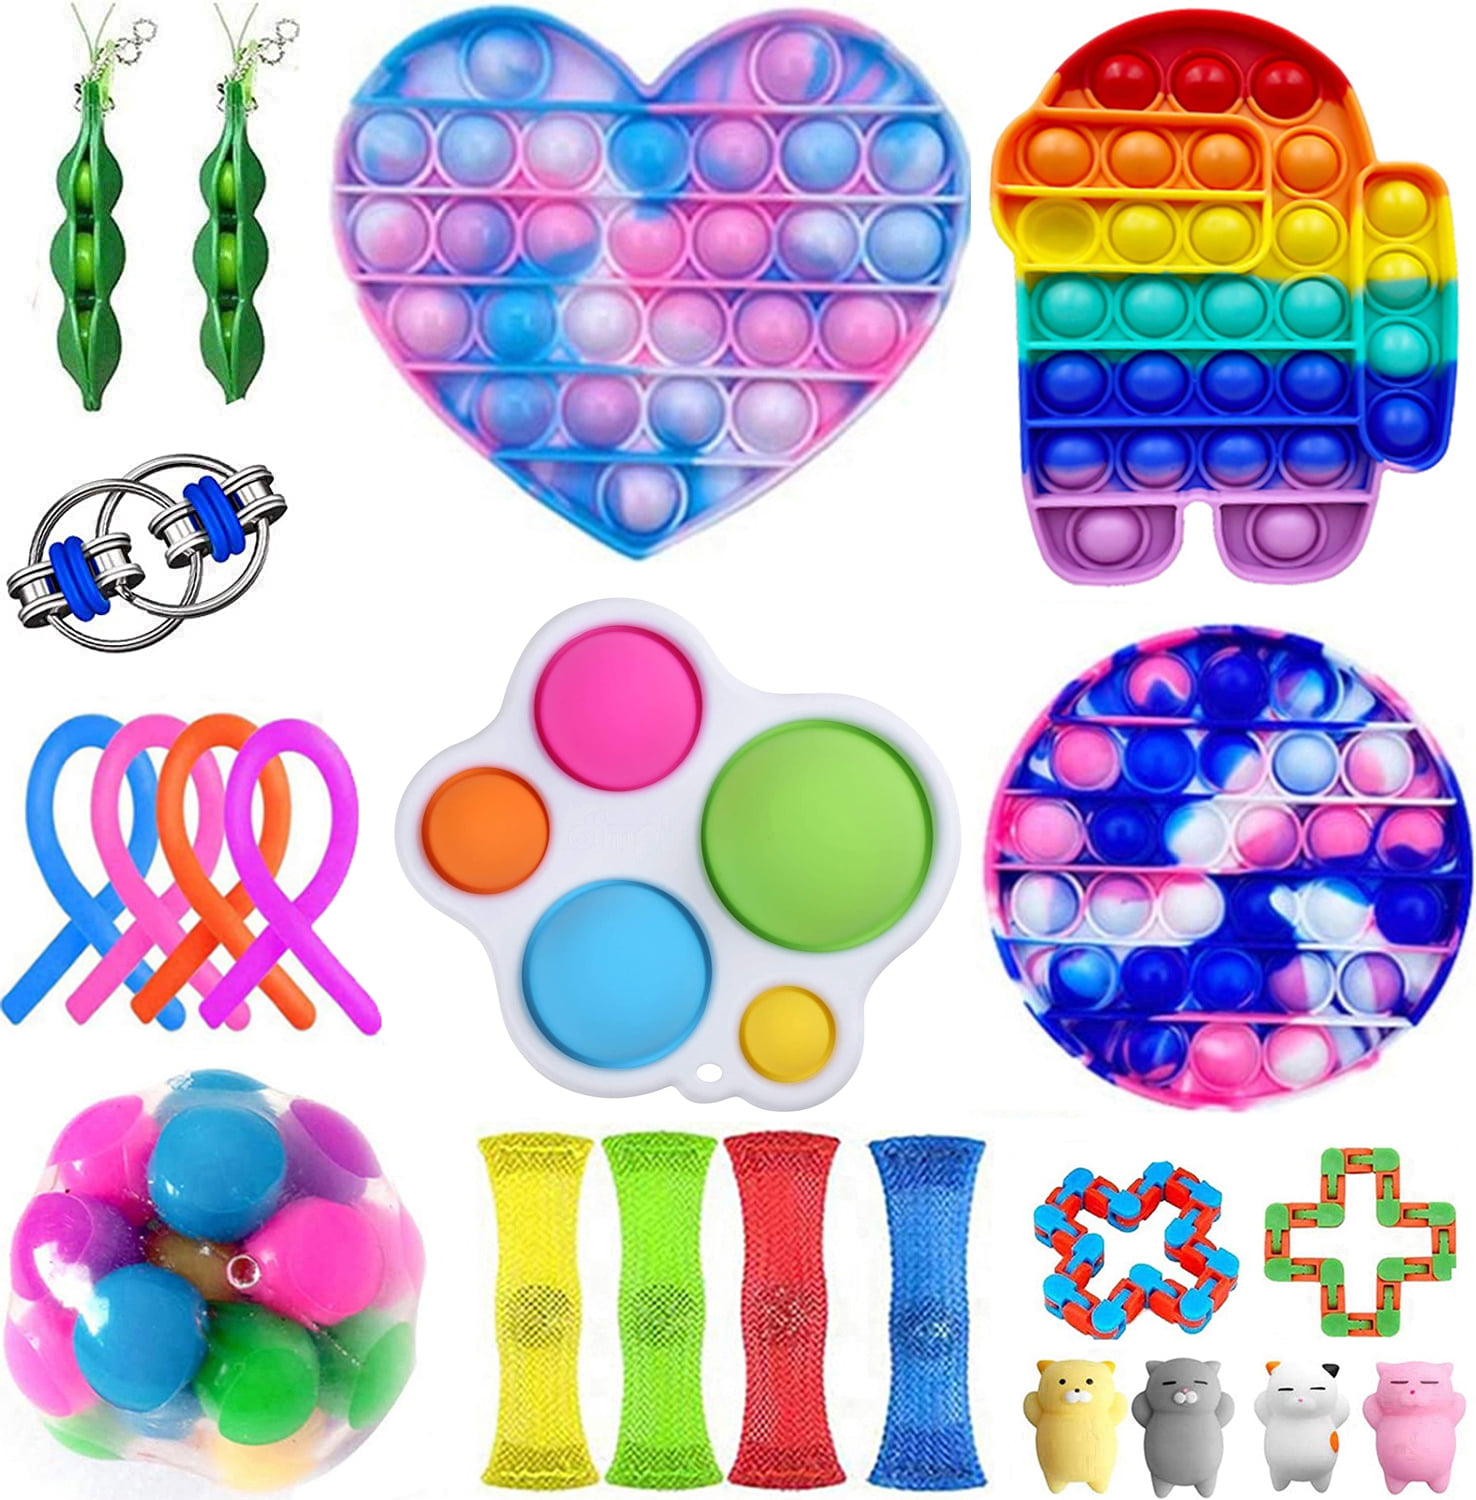 Details about   Rainbow Simple Dimple Bubble Sensory Fidget Toy Anti Anxiety Stress Relief Kids 